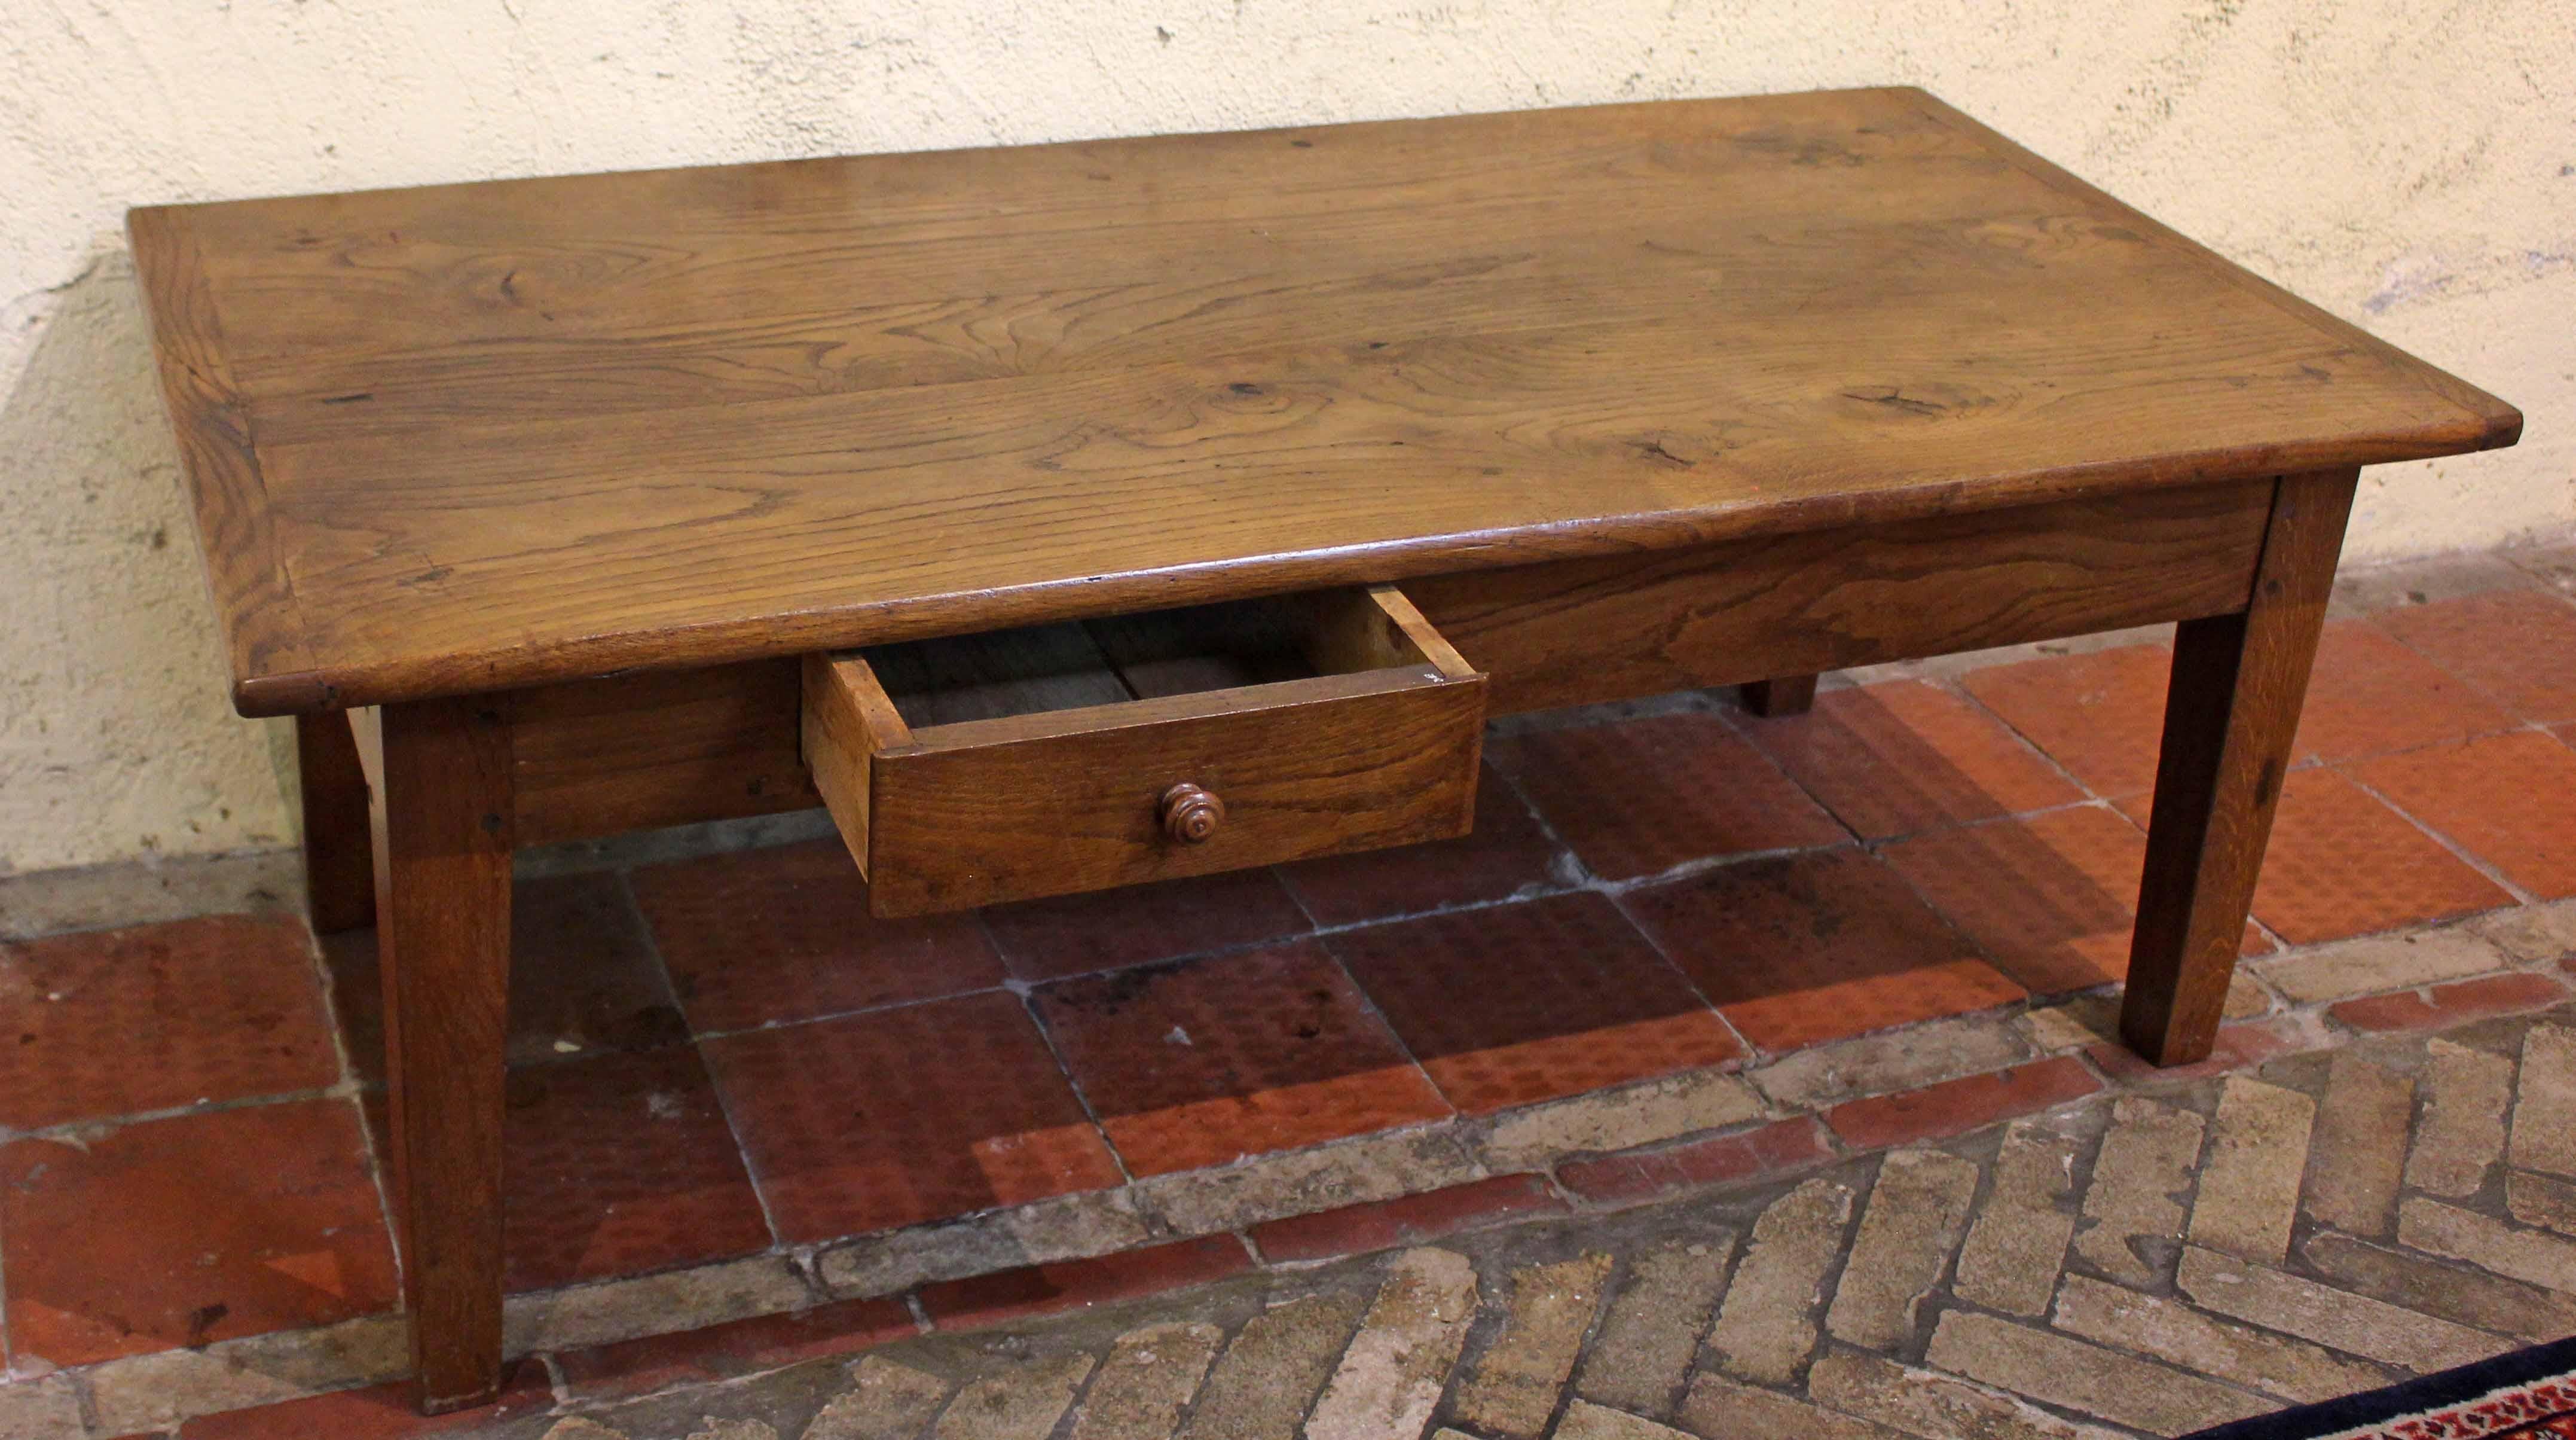 A mid-19th century country French coffee table, reduced from full table height. Well figured chestnut & oak. One side & one end drawer each with turned wood knob. Bread board ends. Chunky tapered legs.

Whitehall Antiques is a family business that